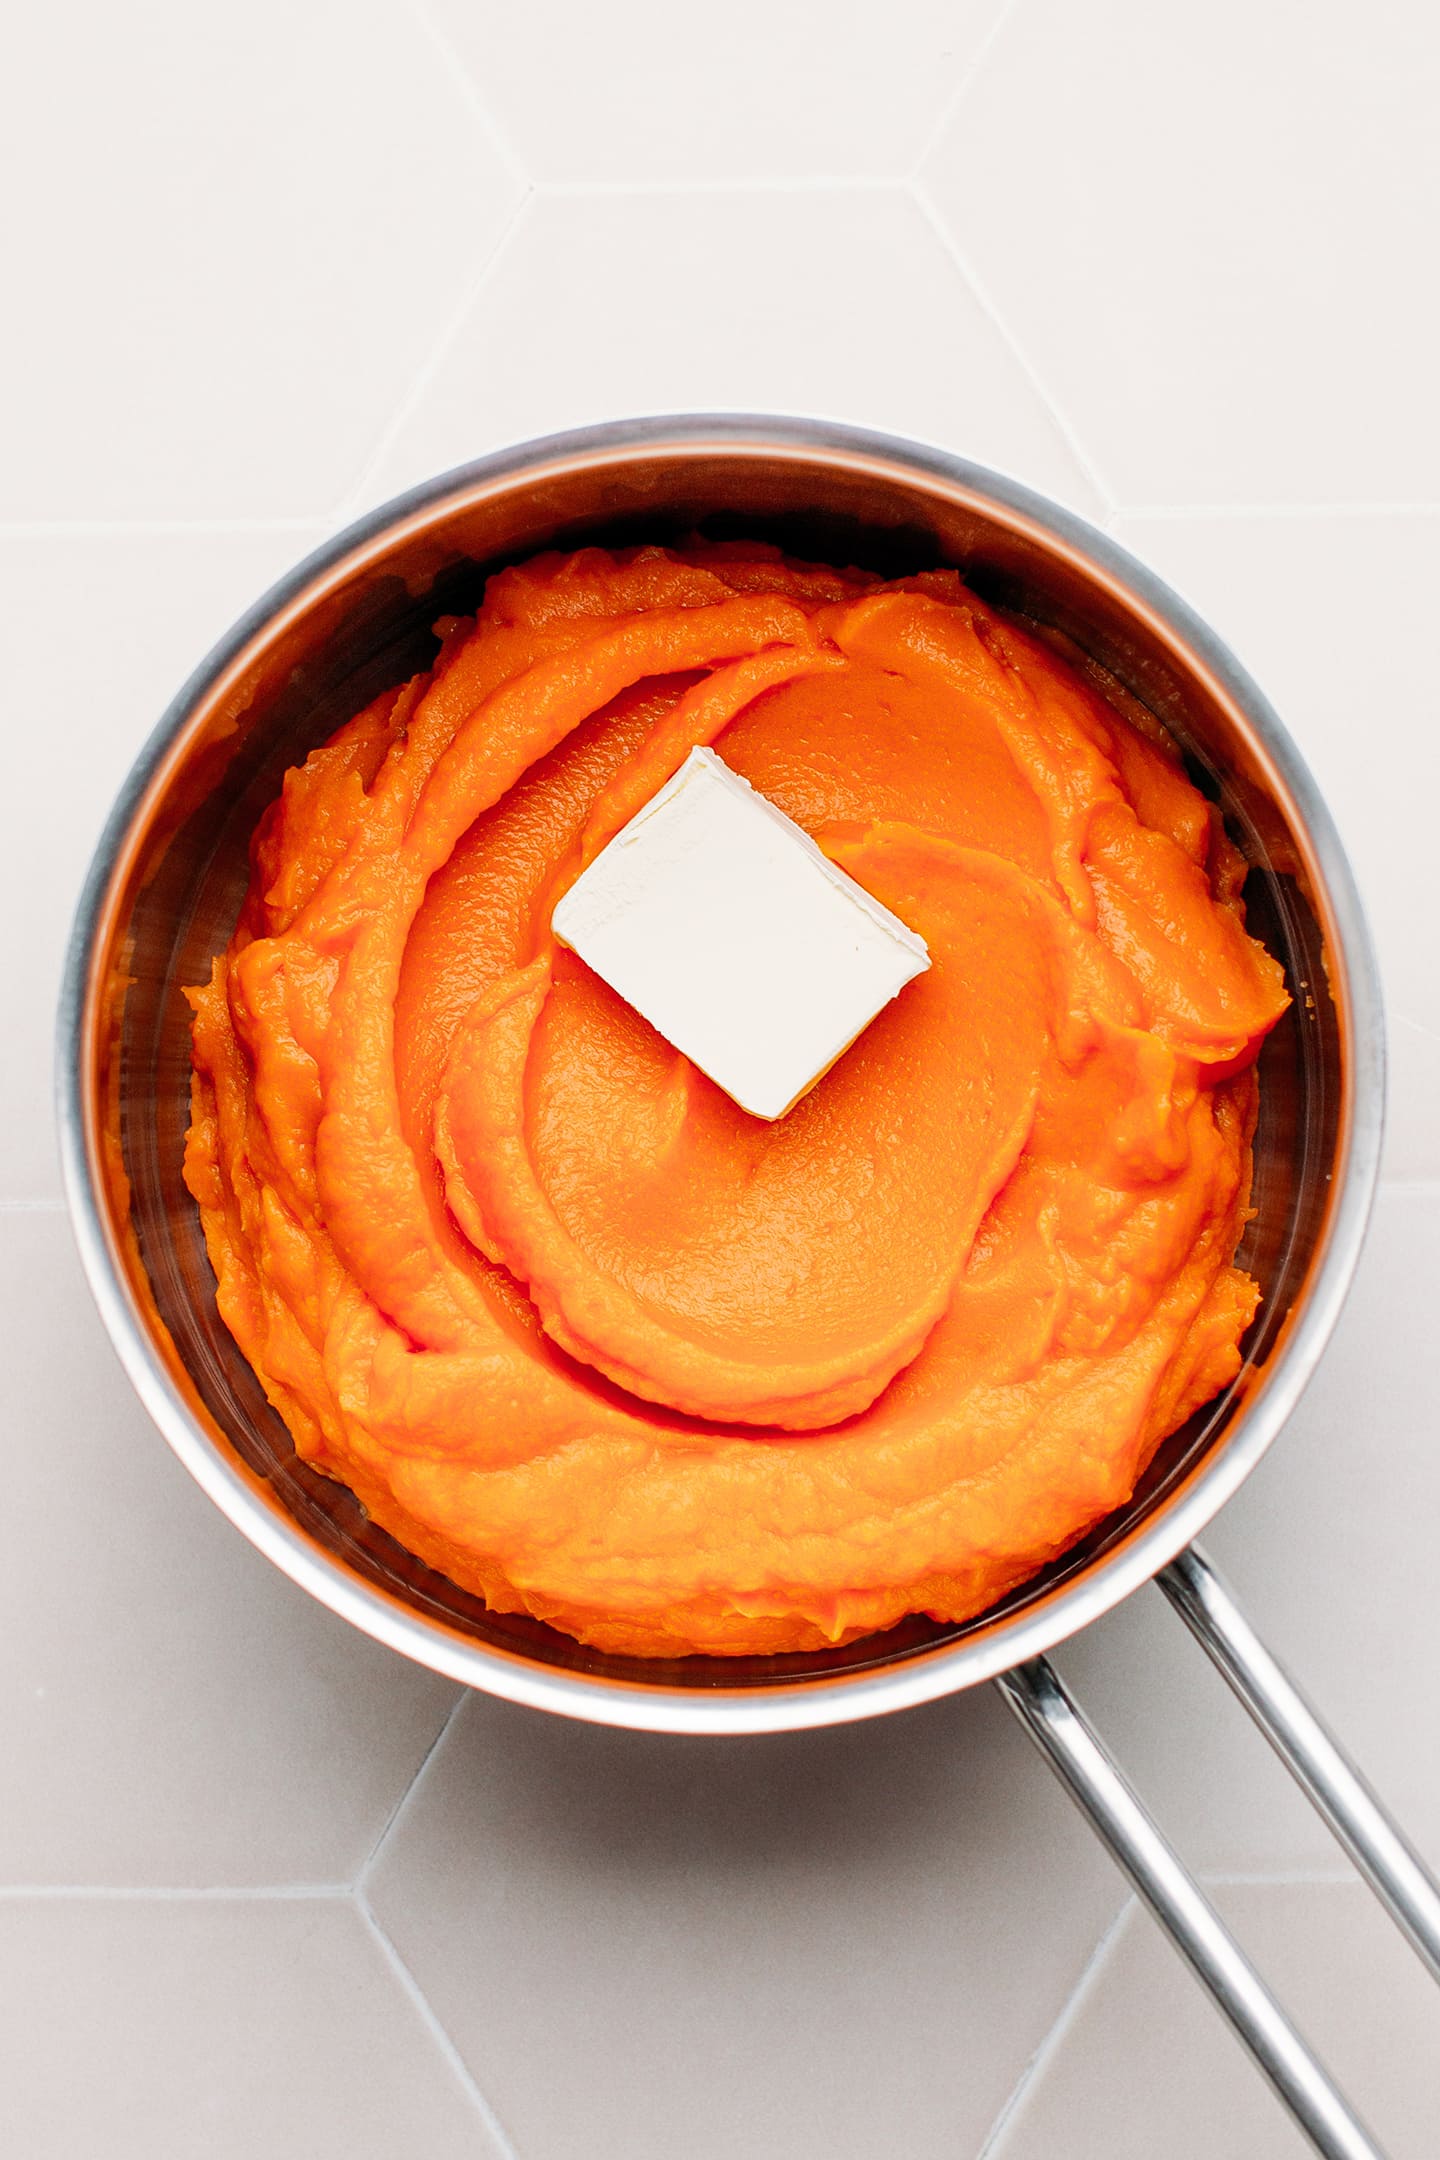 Mashed sweet potatoes and butter in a saucepan.